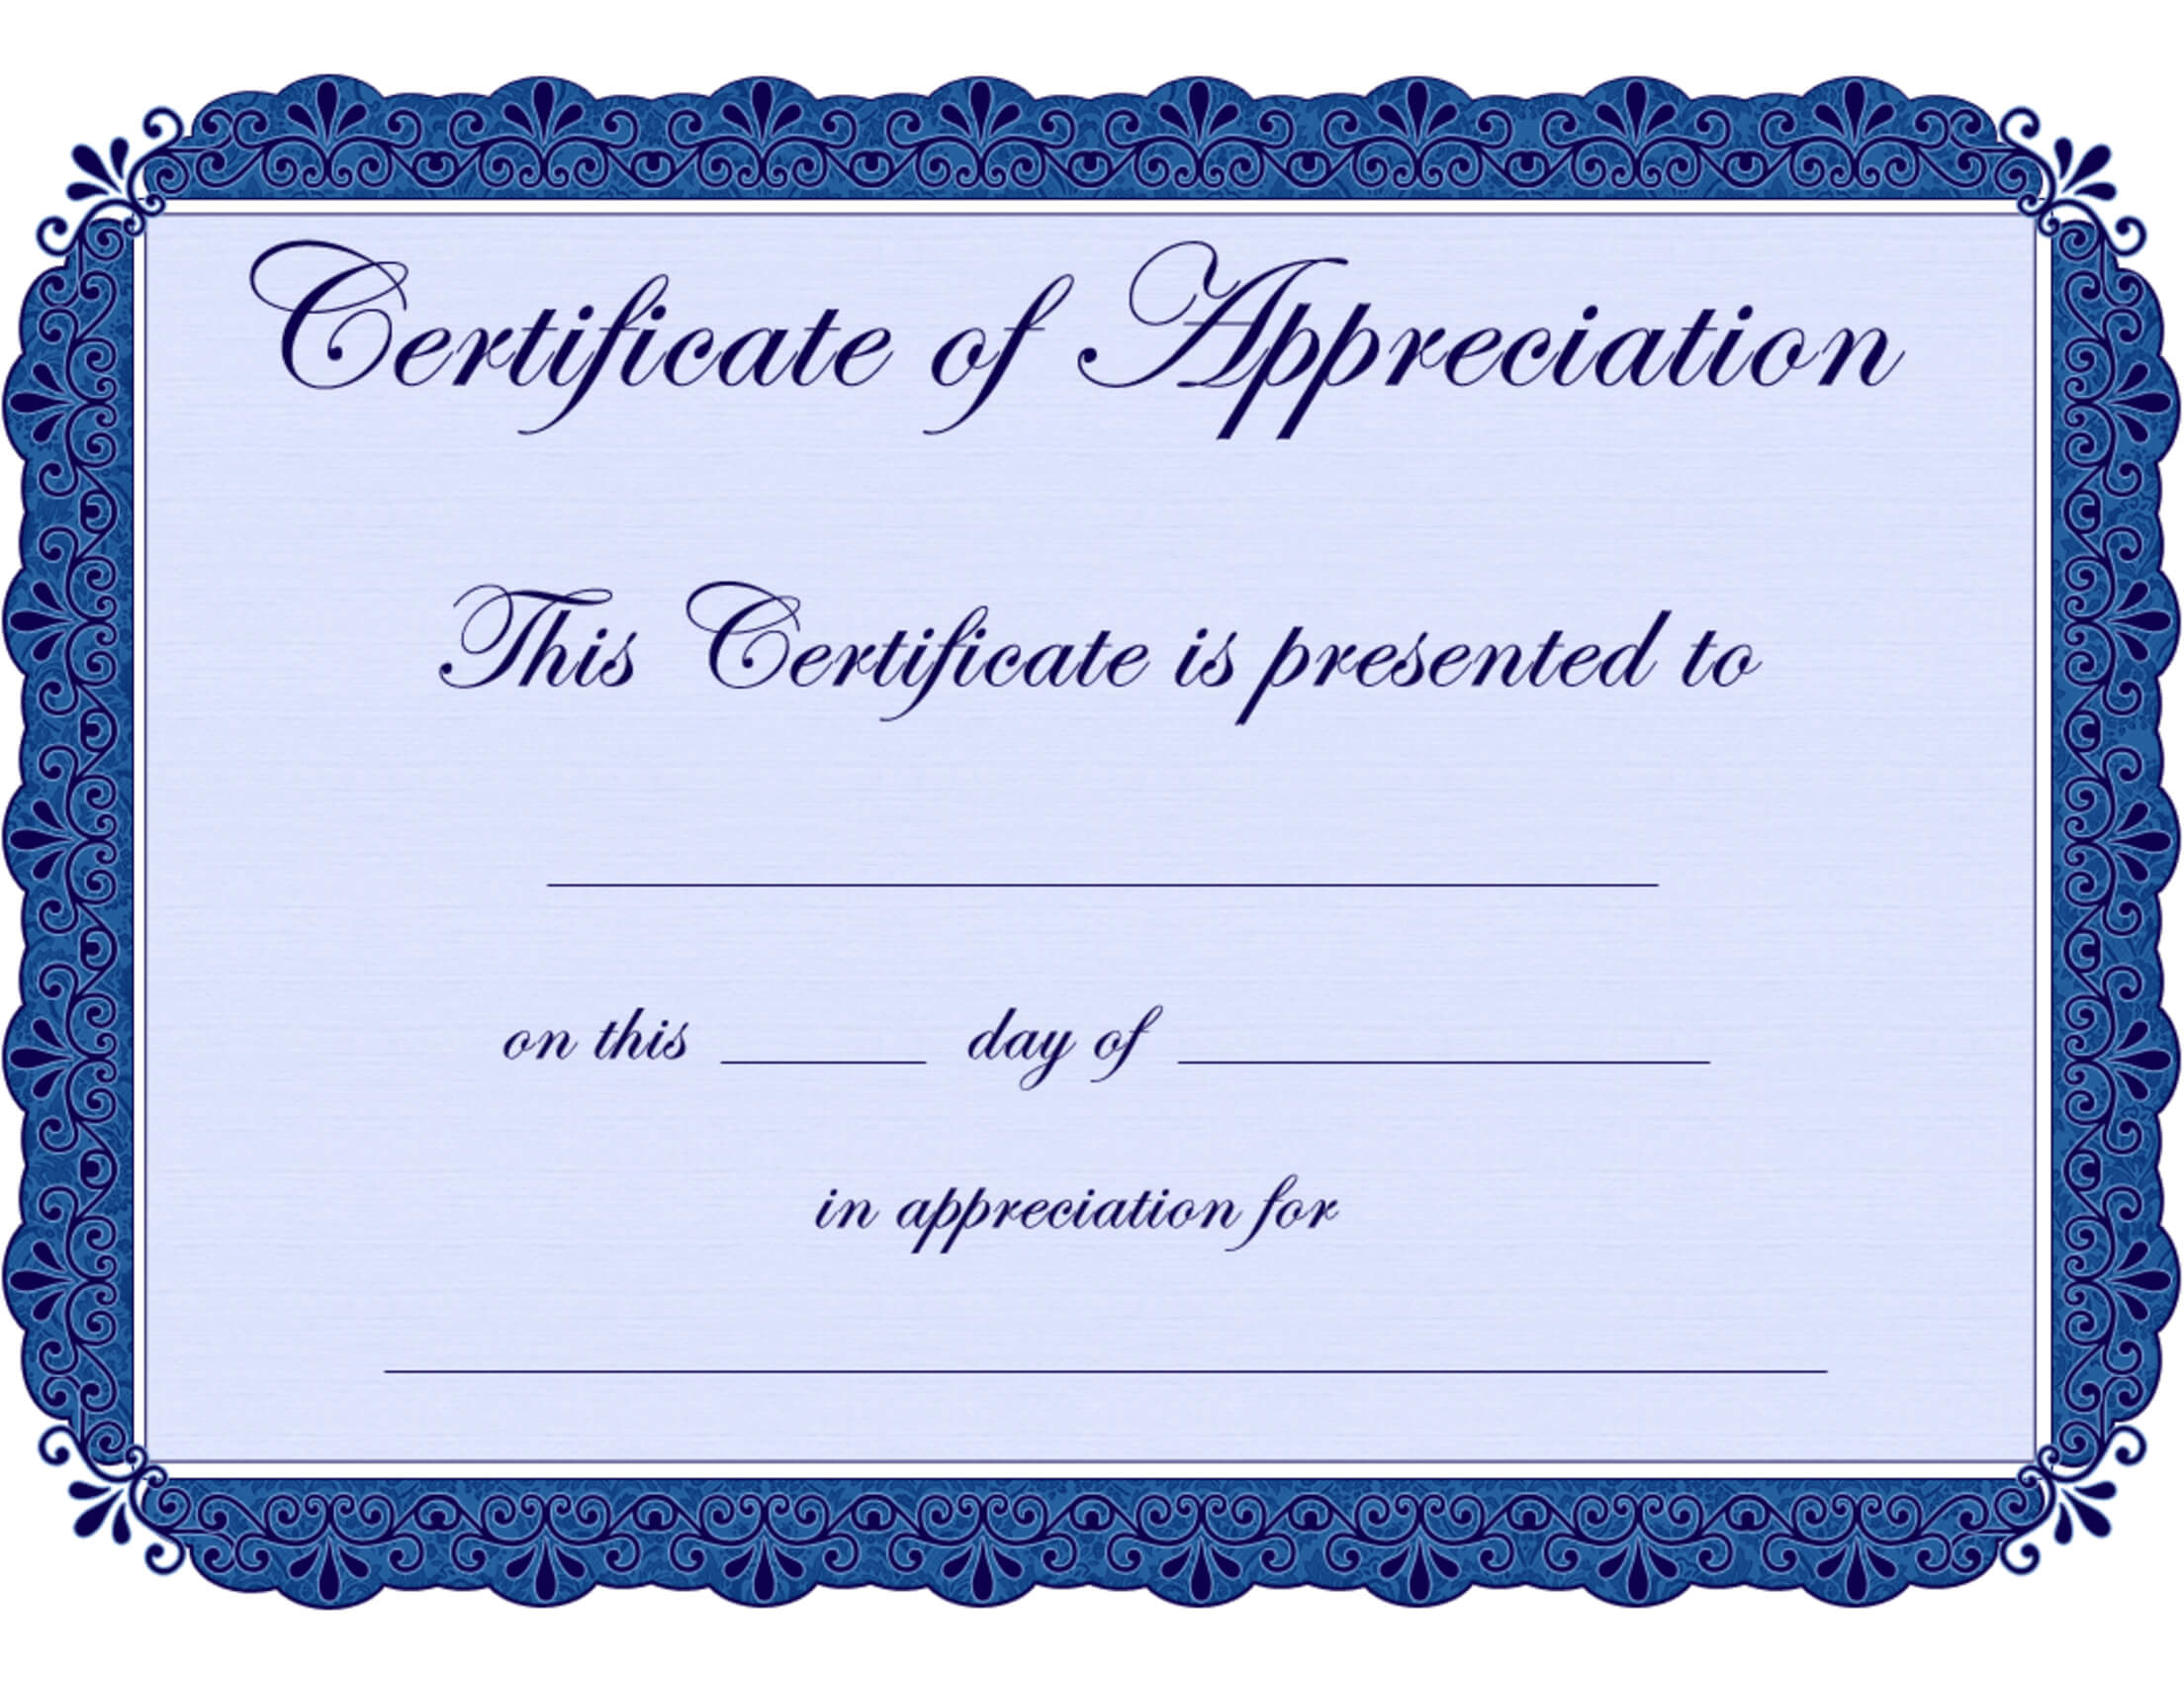 Free Printable Certificates Certificate Of Appreciation Intended For Template For Certificate Of Appreciation In Microsoft Word